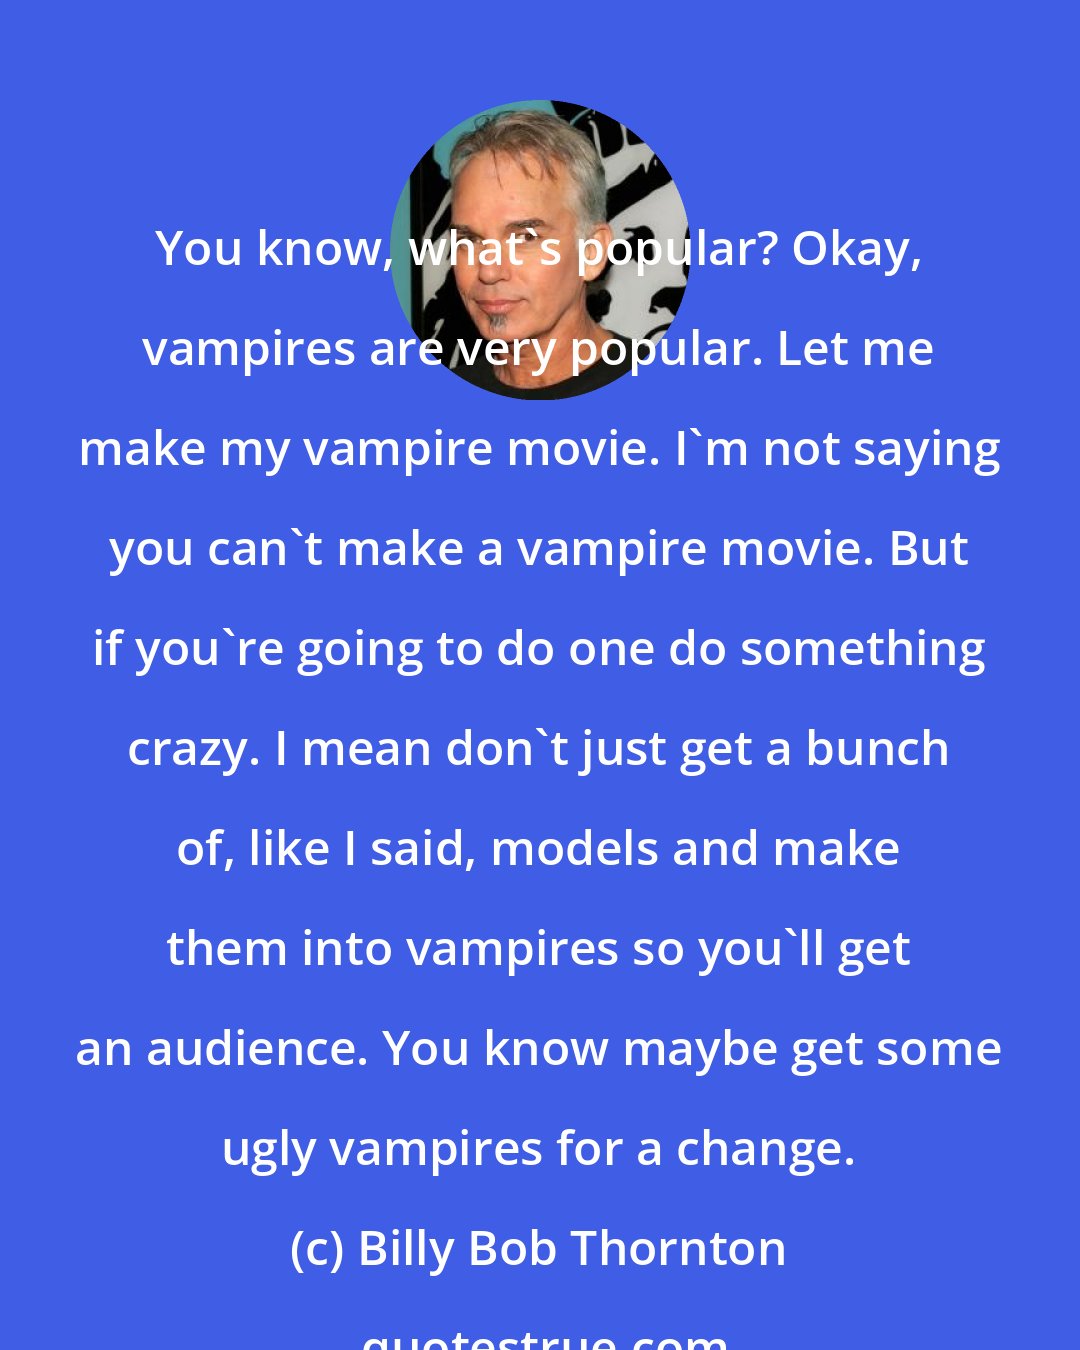 Billy Bob Thornton: You know, what's popular? Okay, vampires are very popular. Let me make my vampire movie. I'm not saying you can't make a vampire movie. But if you're going to do one do something crazy. I mean don't just get a bunch of, like I said, models and make them into vampires so you'll get an audience. You know maybe get some ugly vampires for a change.